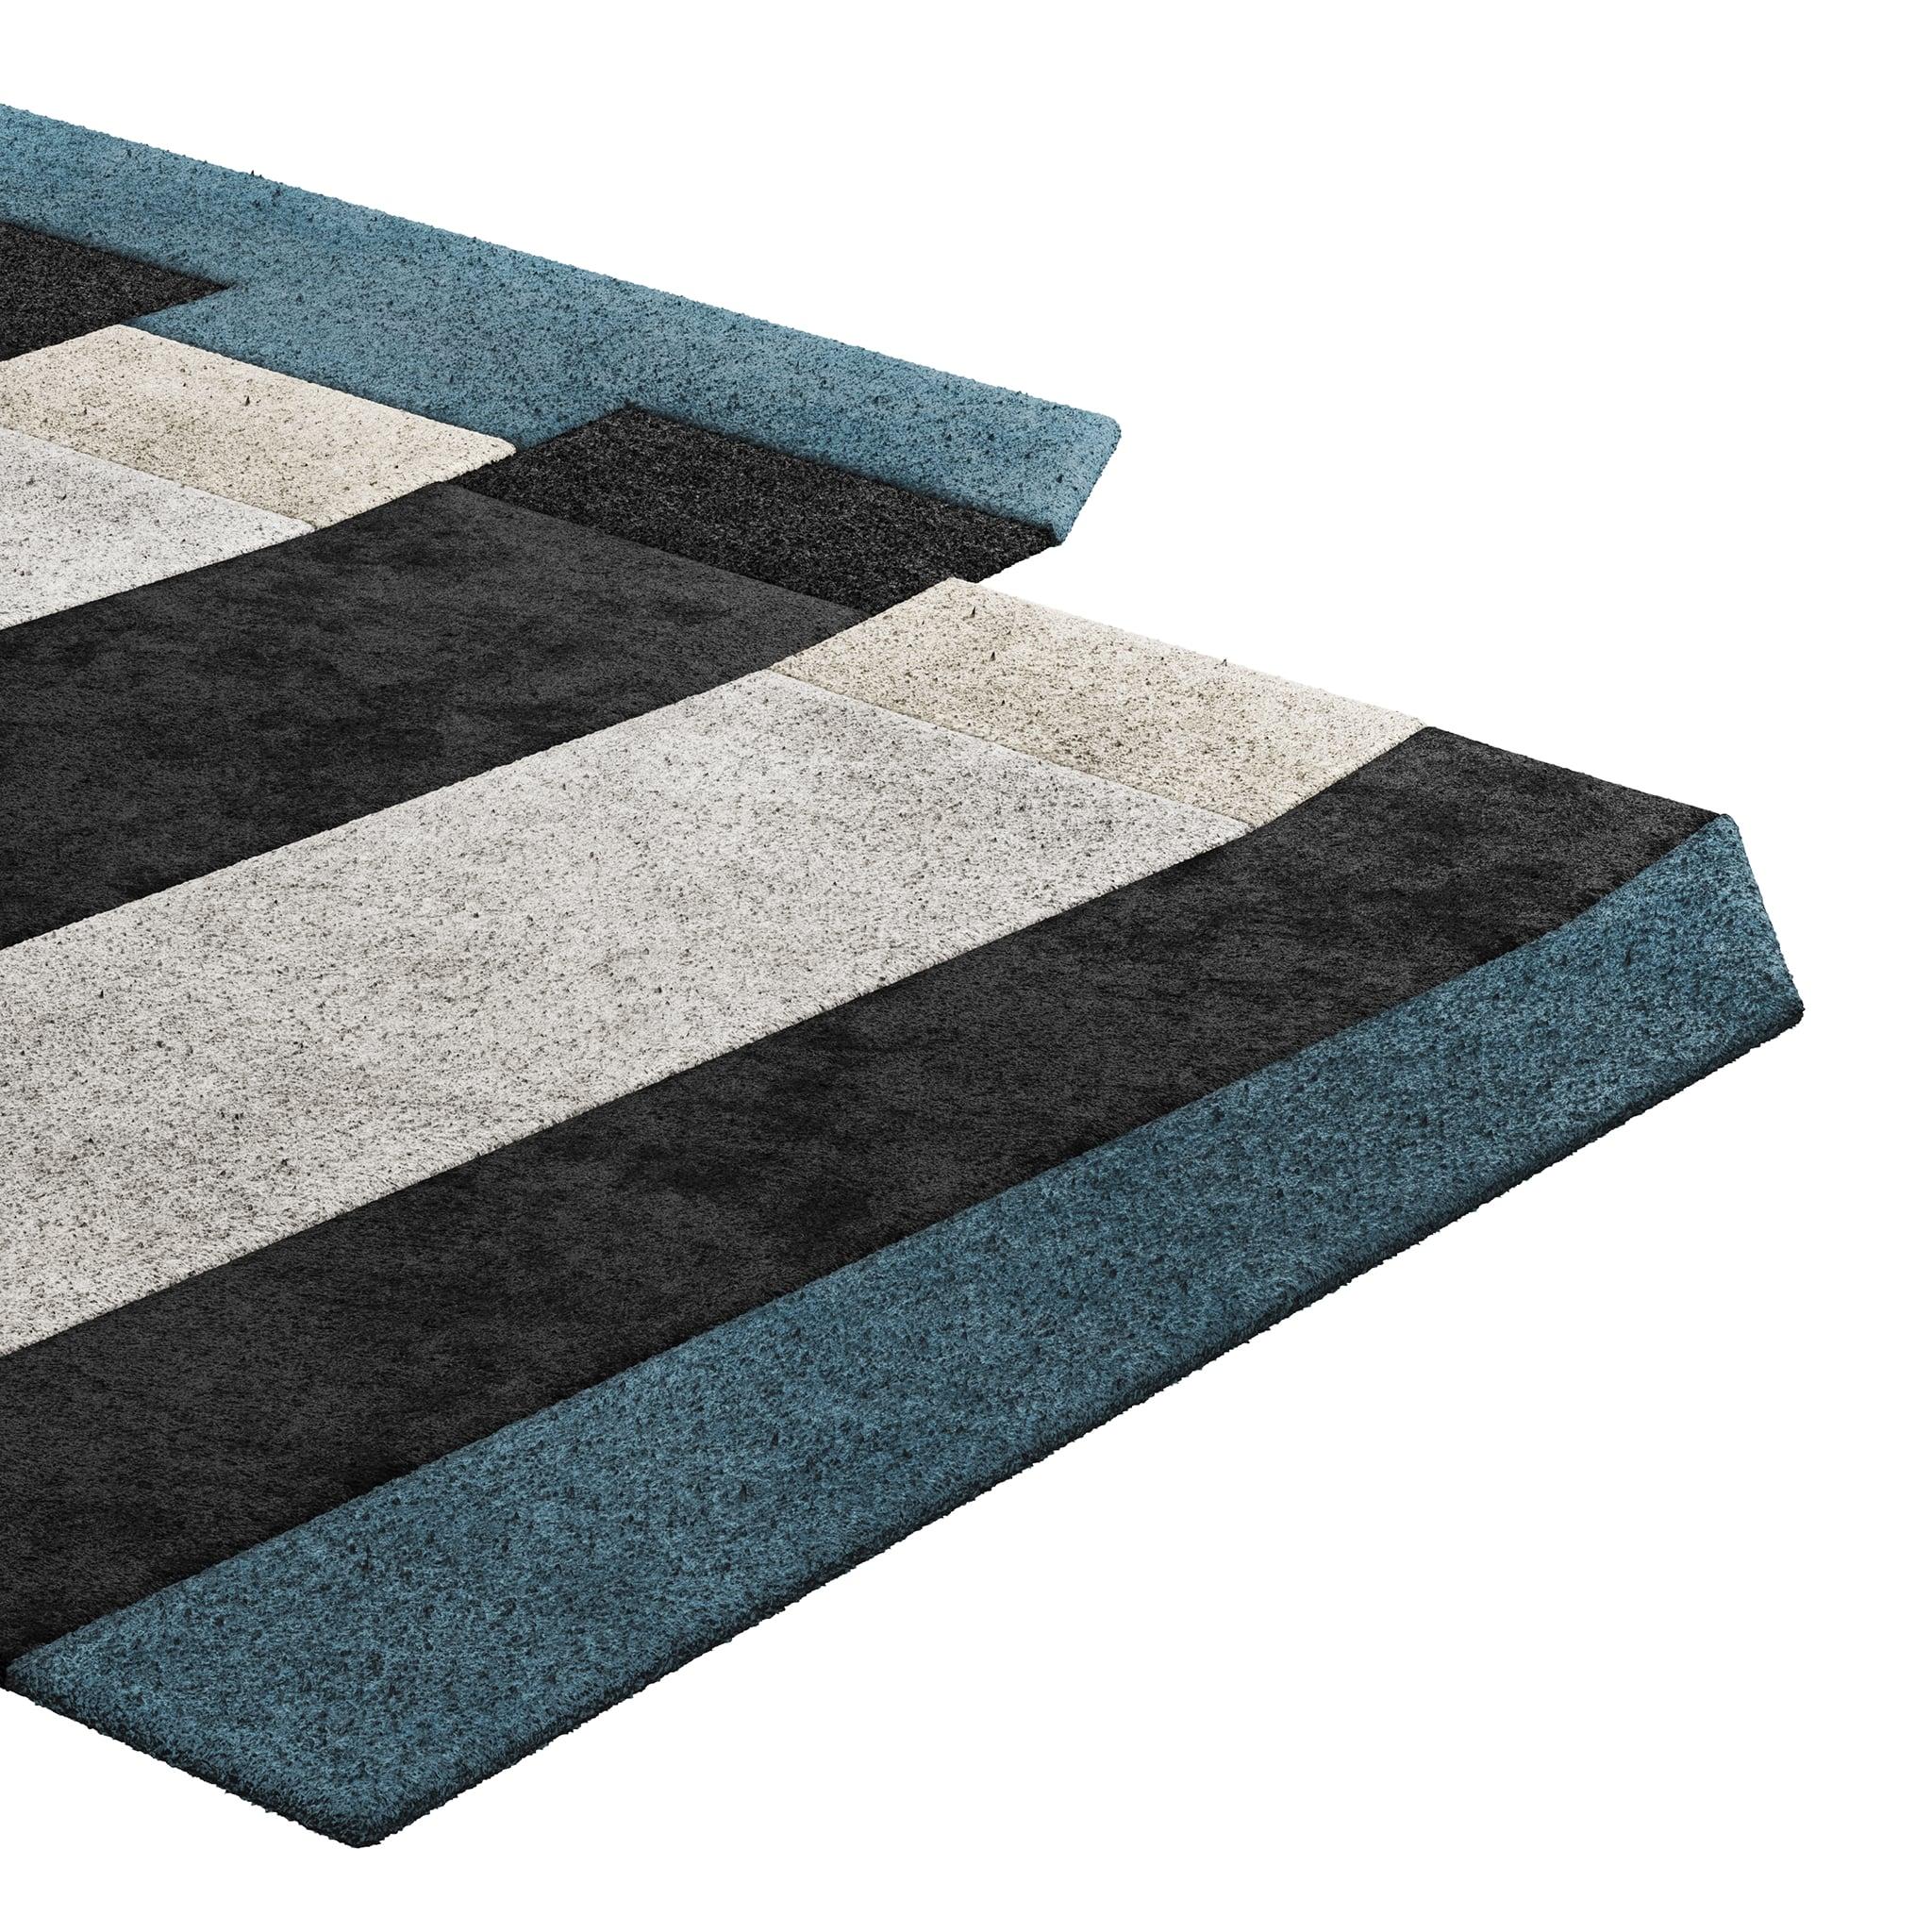 Tapis Retro #015 is a retro rug with an irregular shape and timeless colors. Inspired by architectural lines, this geometric rug makes a statement in any living space. 

Using a 3D-tufted technique that combines cut and loop pile, the retro rug in